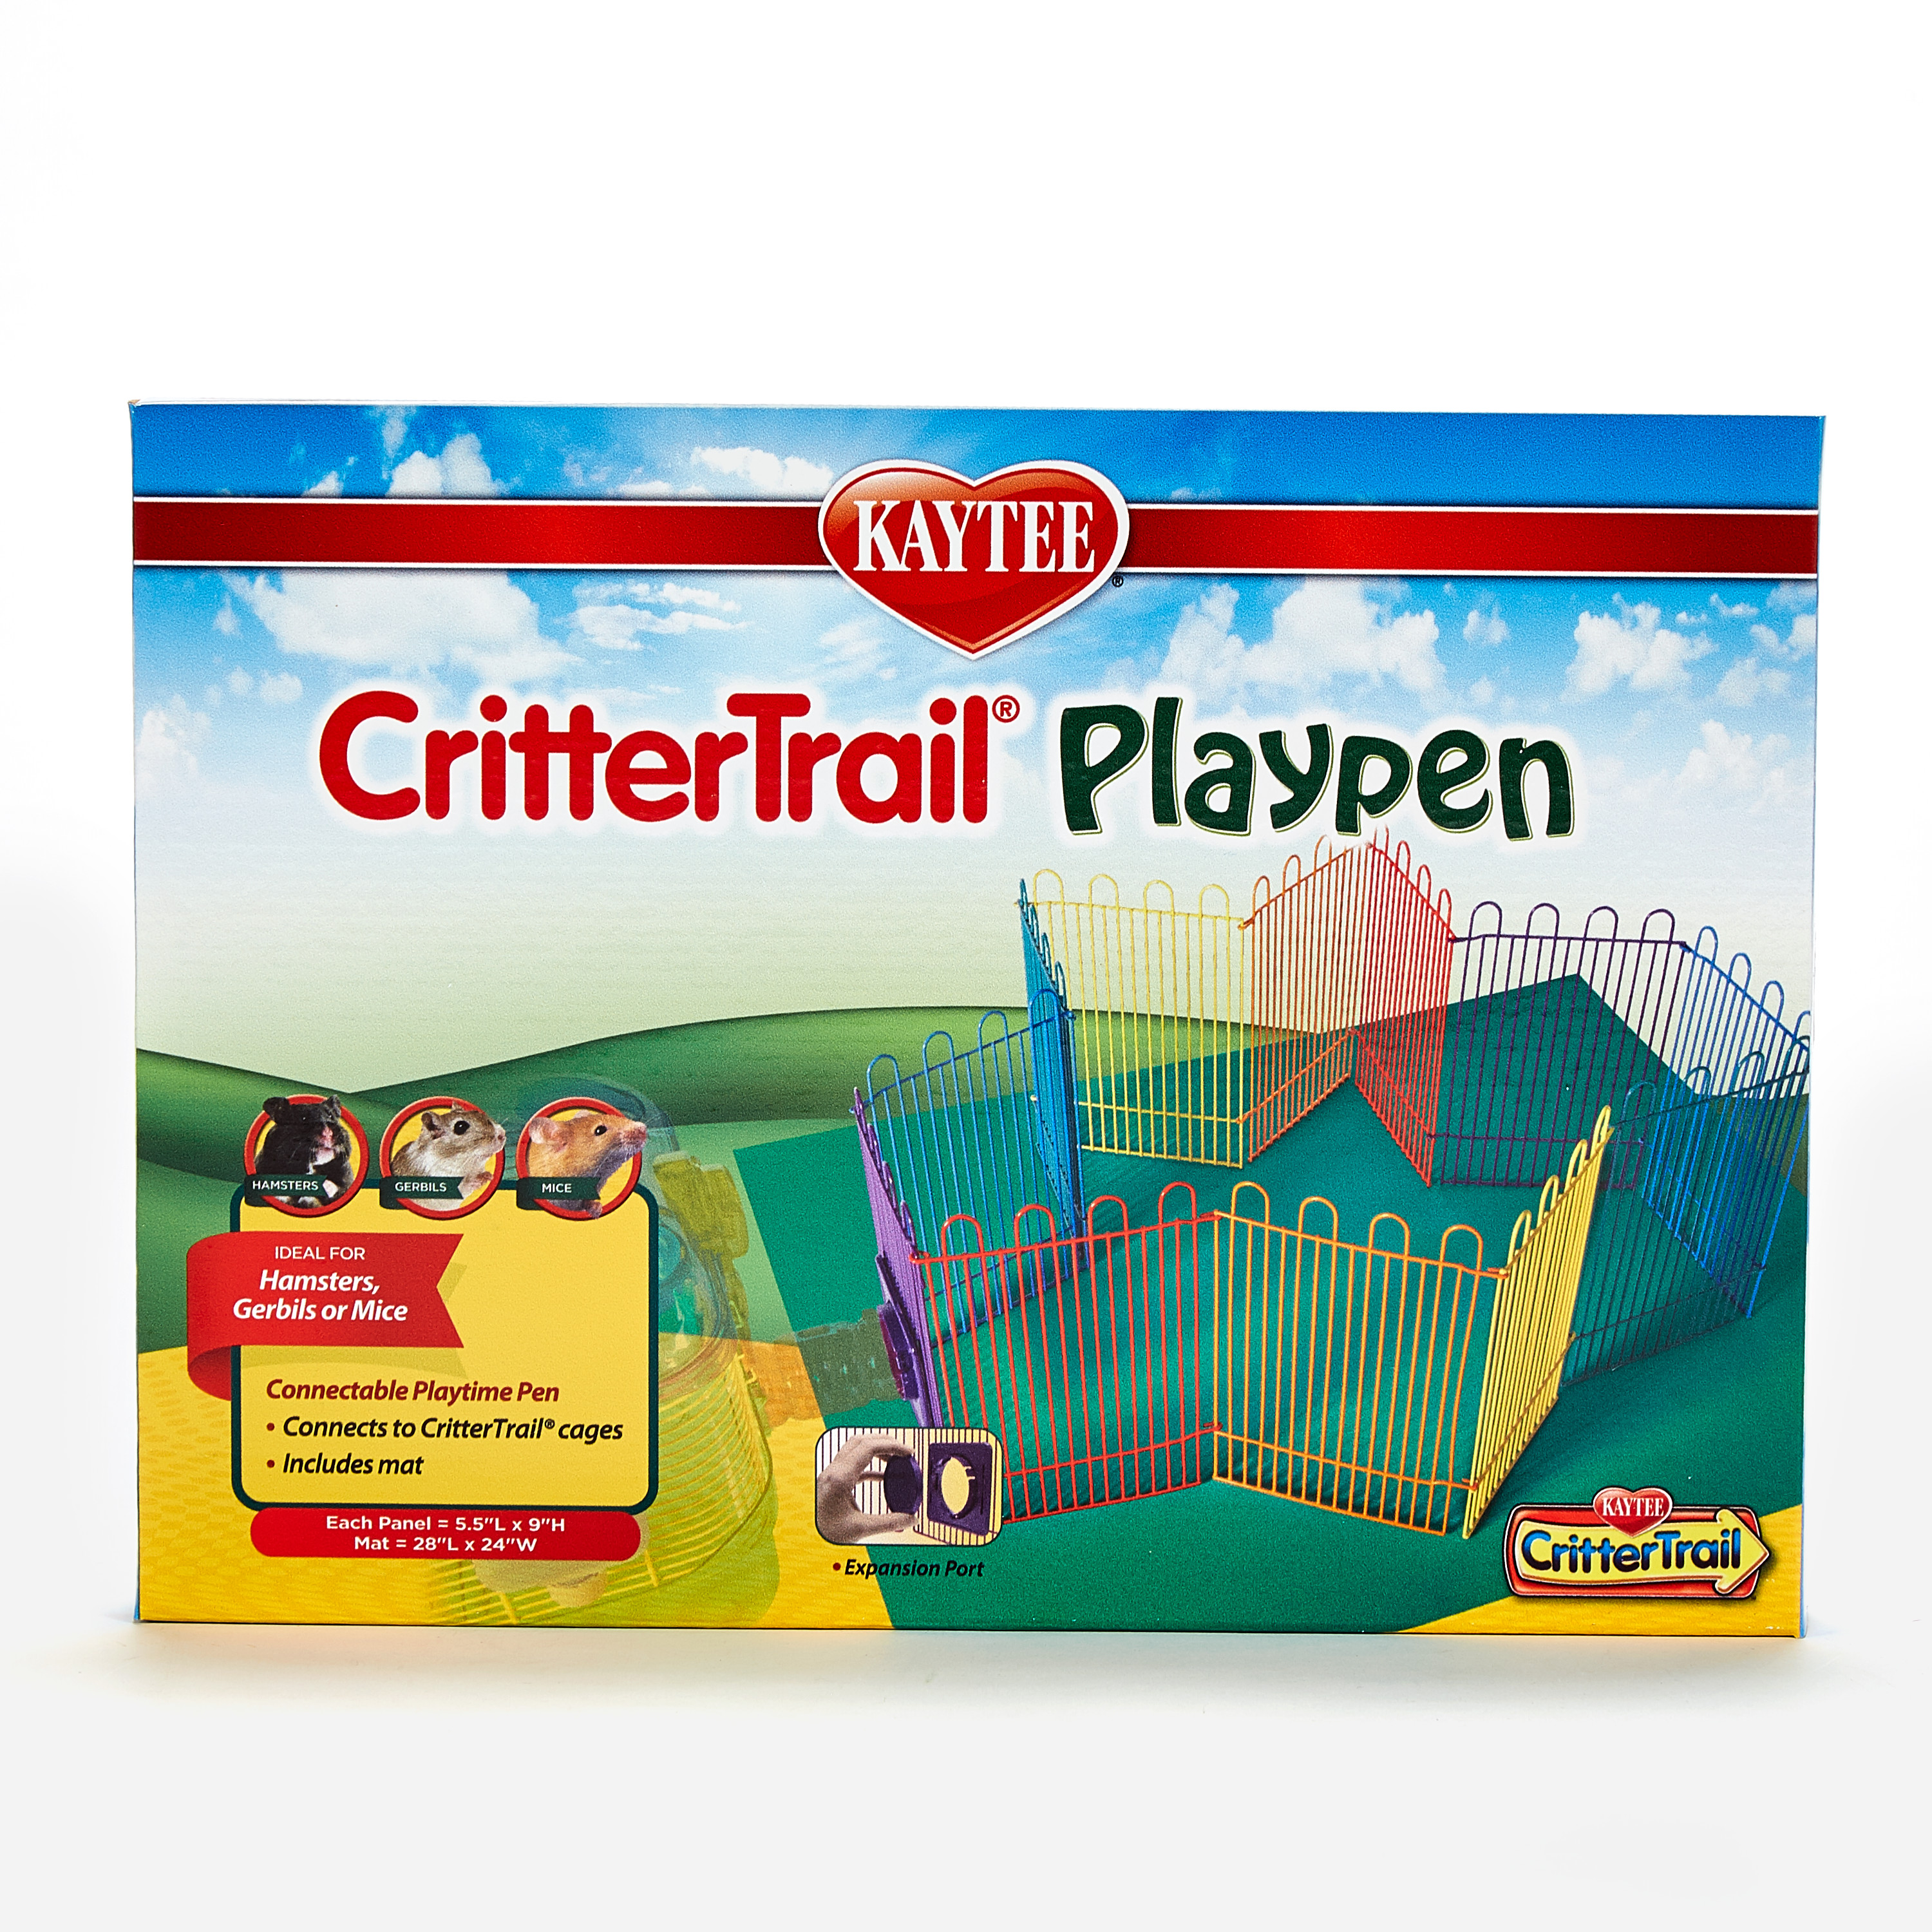 Kaytee Critter-Trail Playpen with Mat for Pet Gerbils, Hamsters or Mice - image 1 of 12